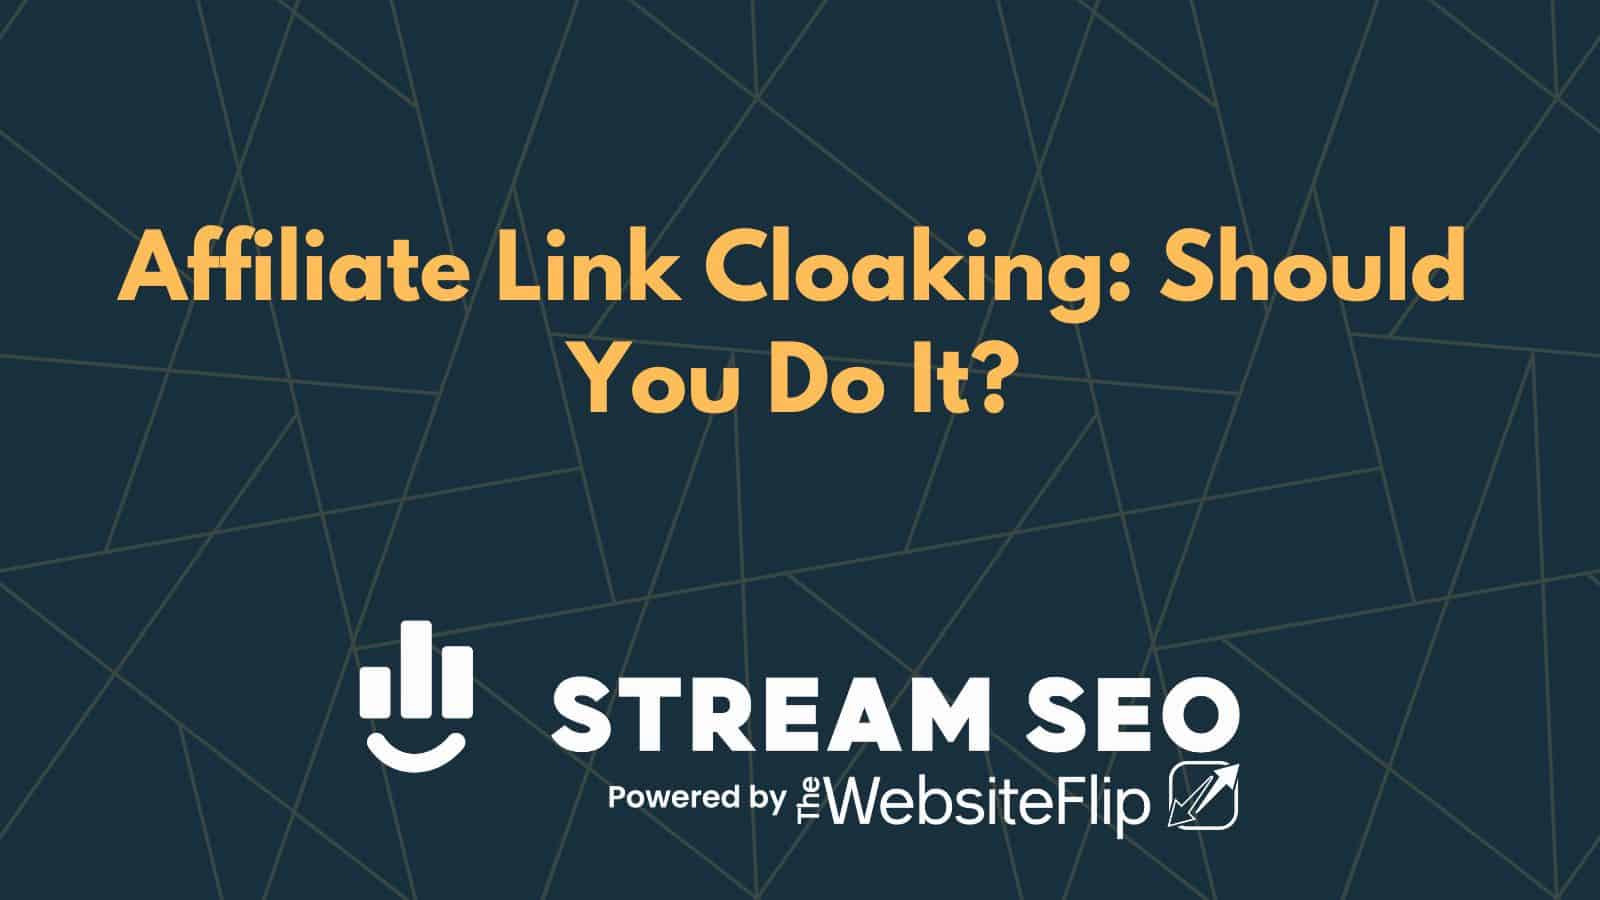 Affiliate Link Cloaking: Should You Do It?